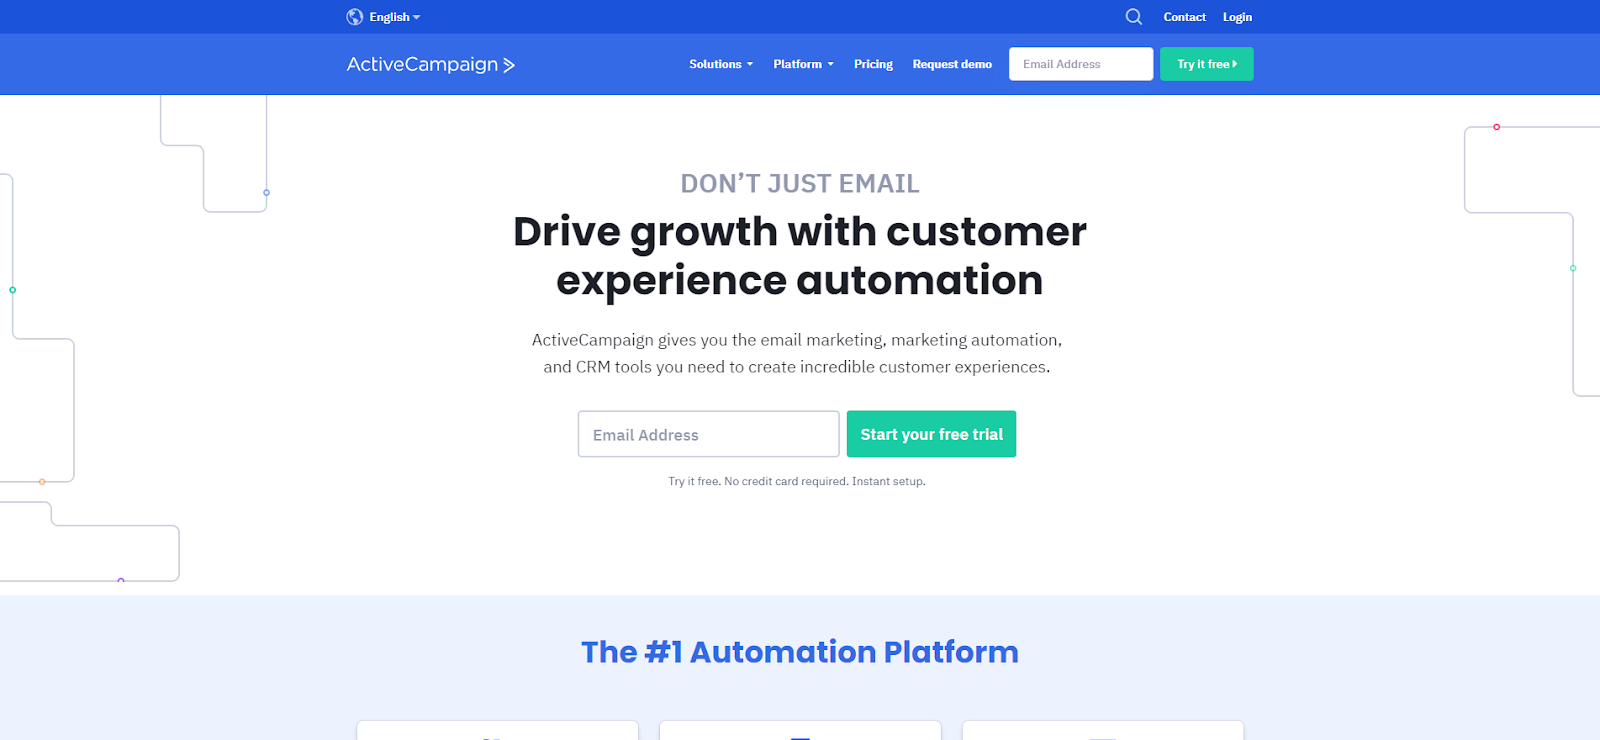 Email marketing automation tool - ActiveCampaign